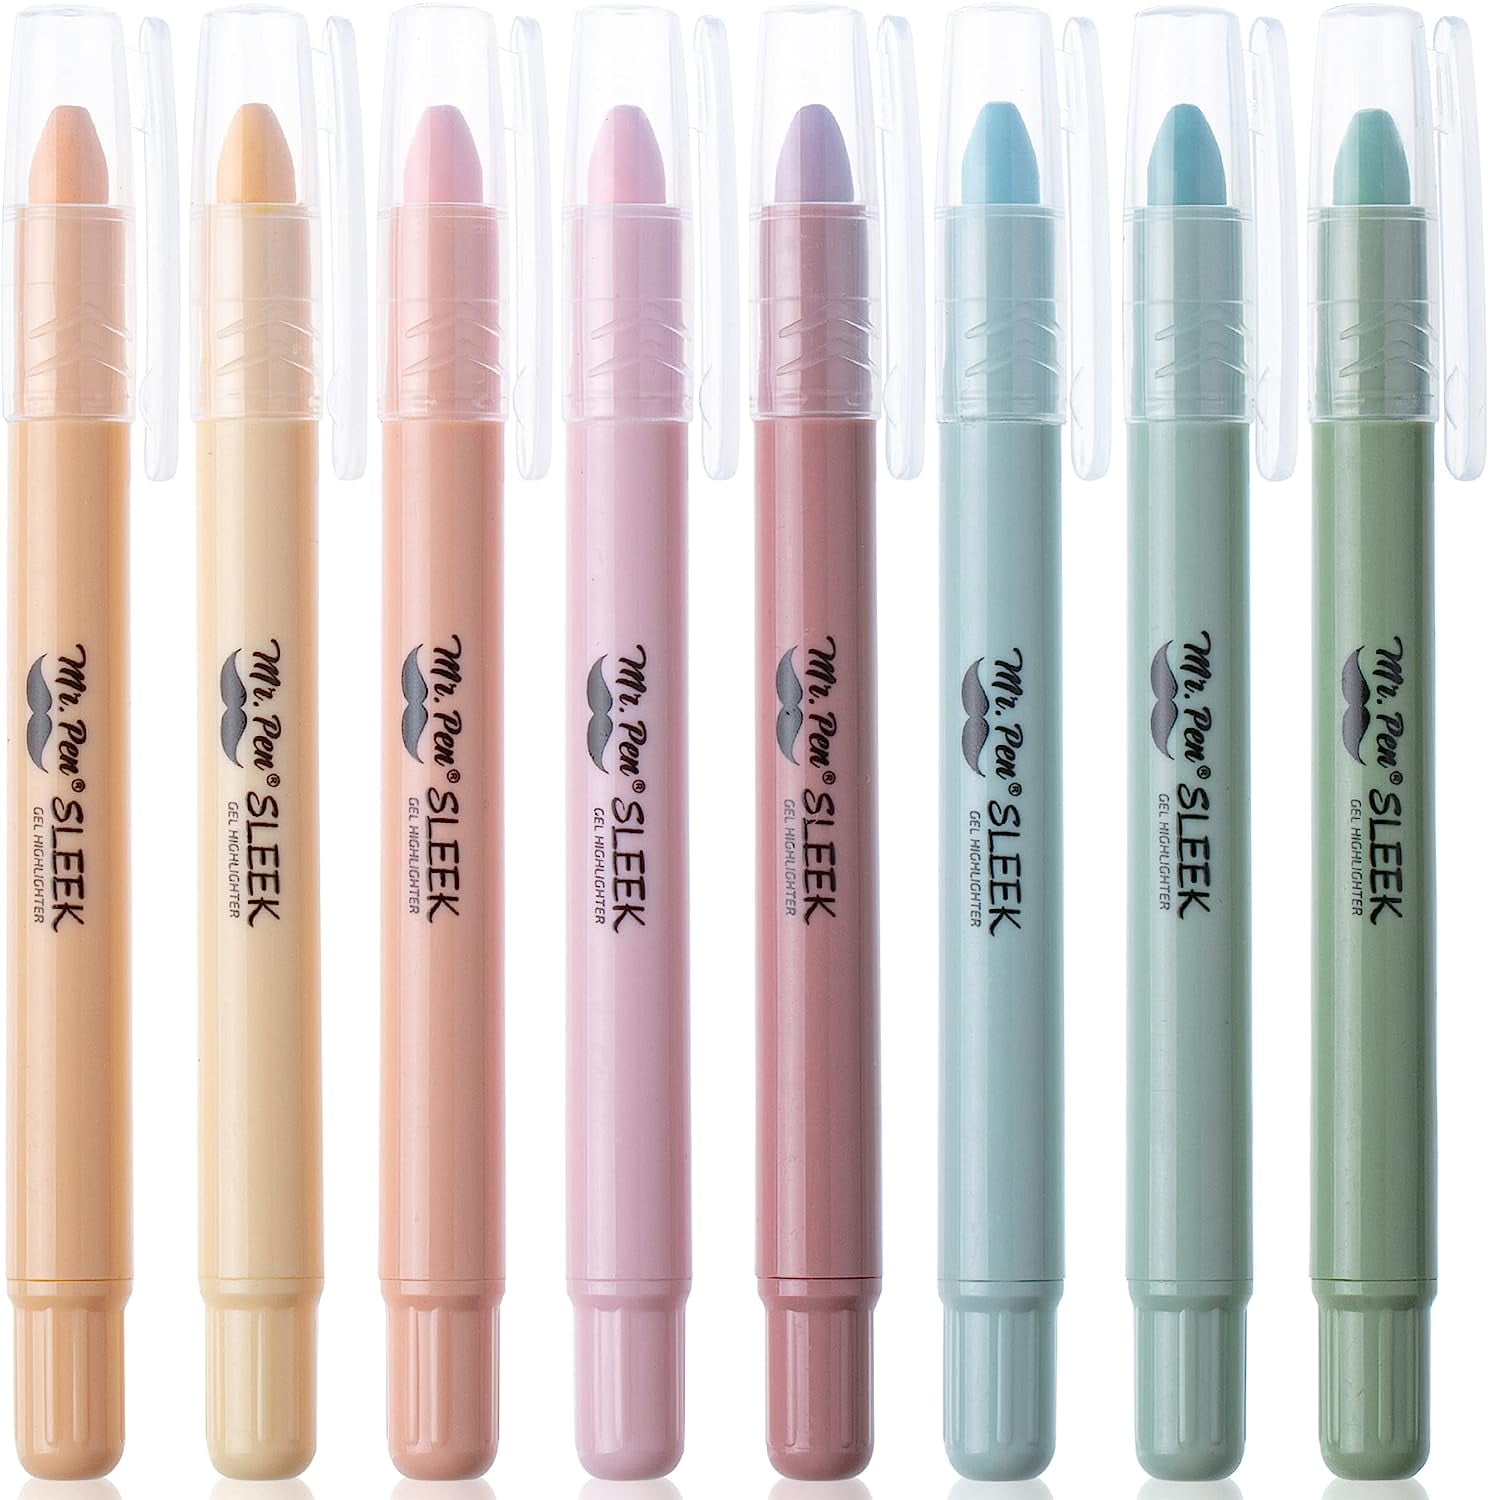 Mr. Pen- Bible Gel Highlighters and Fineliner Pens No Bleed, Pastel Colors,  18 Pcs, Bible Journaling Kit, Bible Highlighters and Pens No Bleed, Bible  Pens, Gel Highlighters, No Bleed Highlighters - Yahoo Shopping